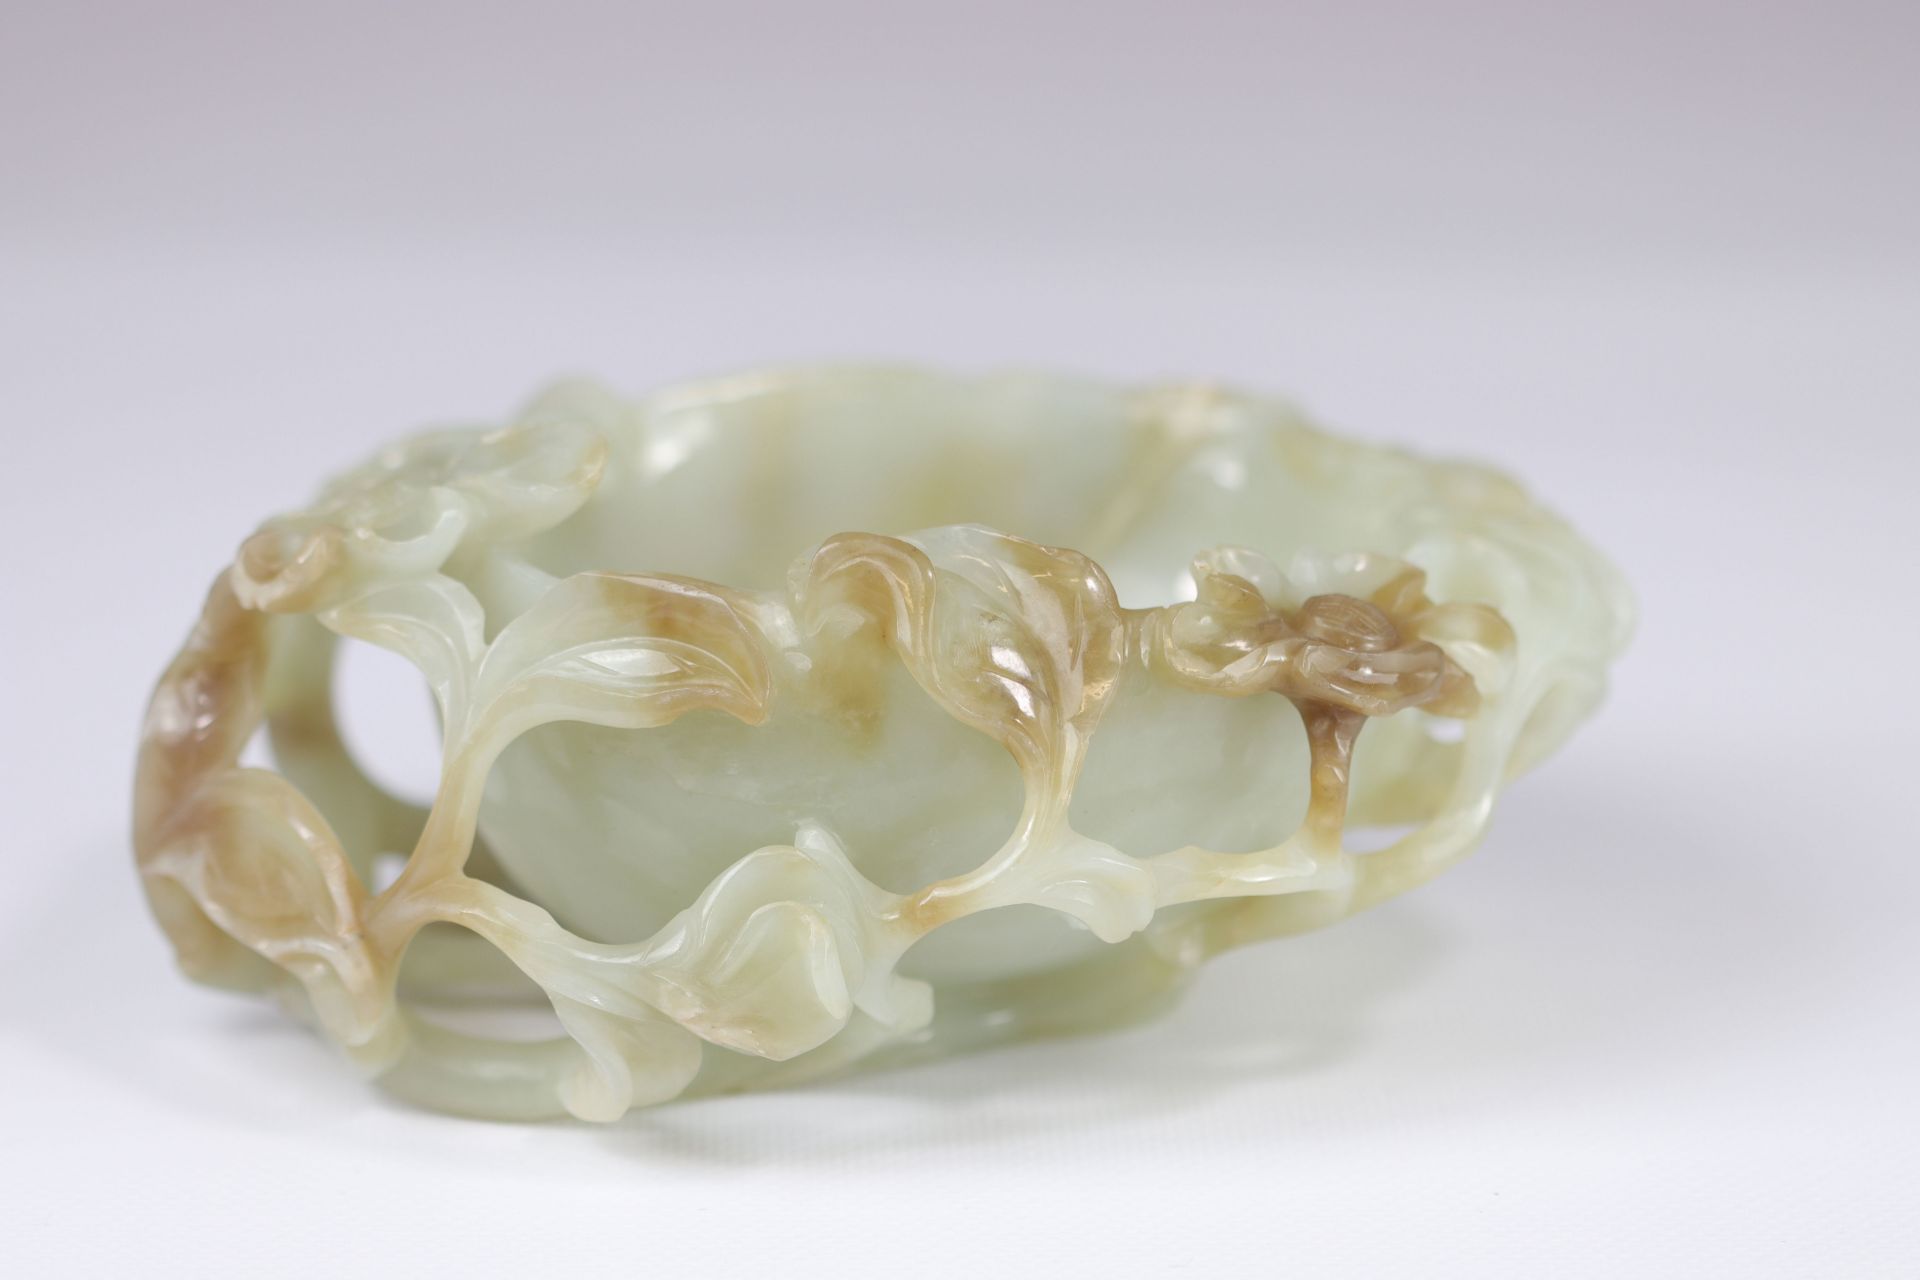 Celadon and beige jade brush rinse, Qing dynasty vegetable decor - Image 4 of 6